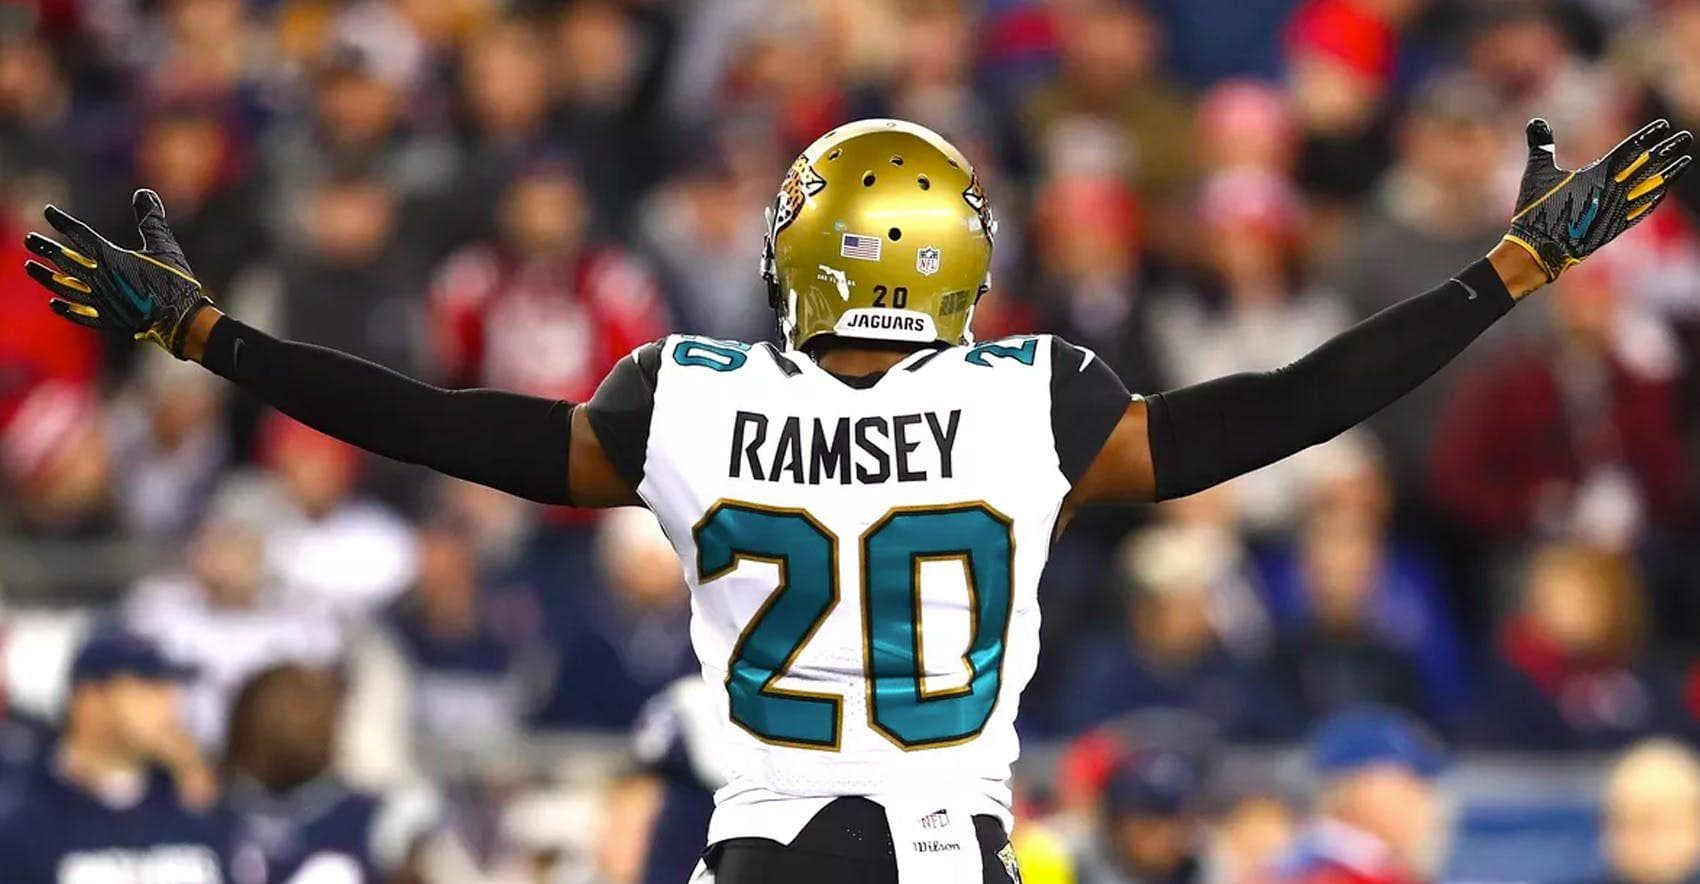 The Best Current NFL Cornerbacks, Ranked by Football Fans